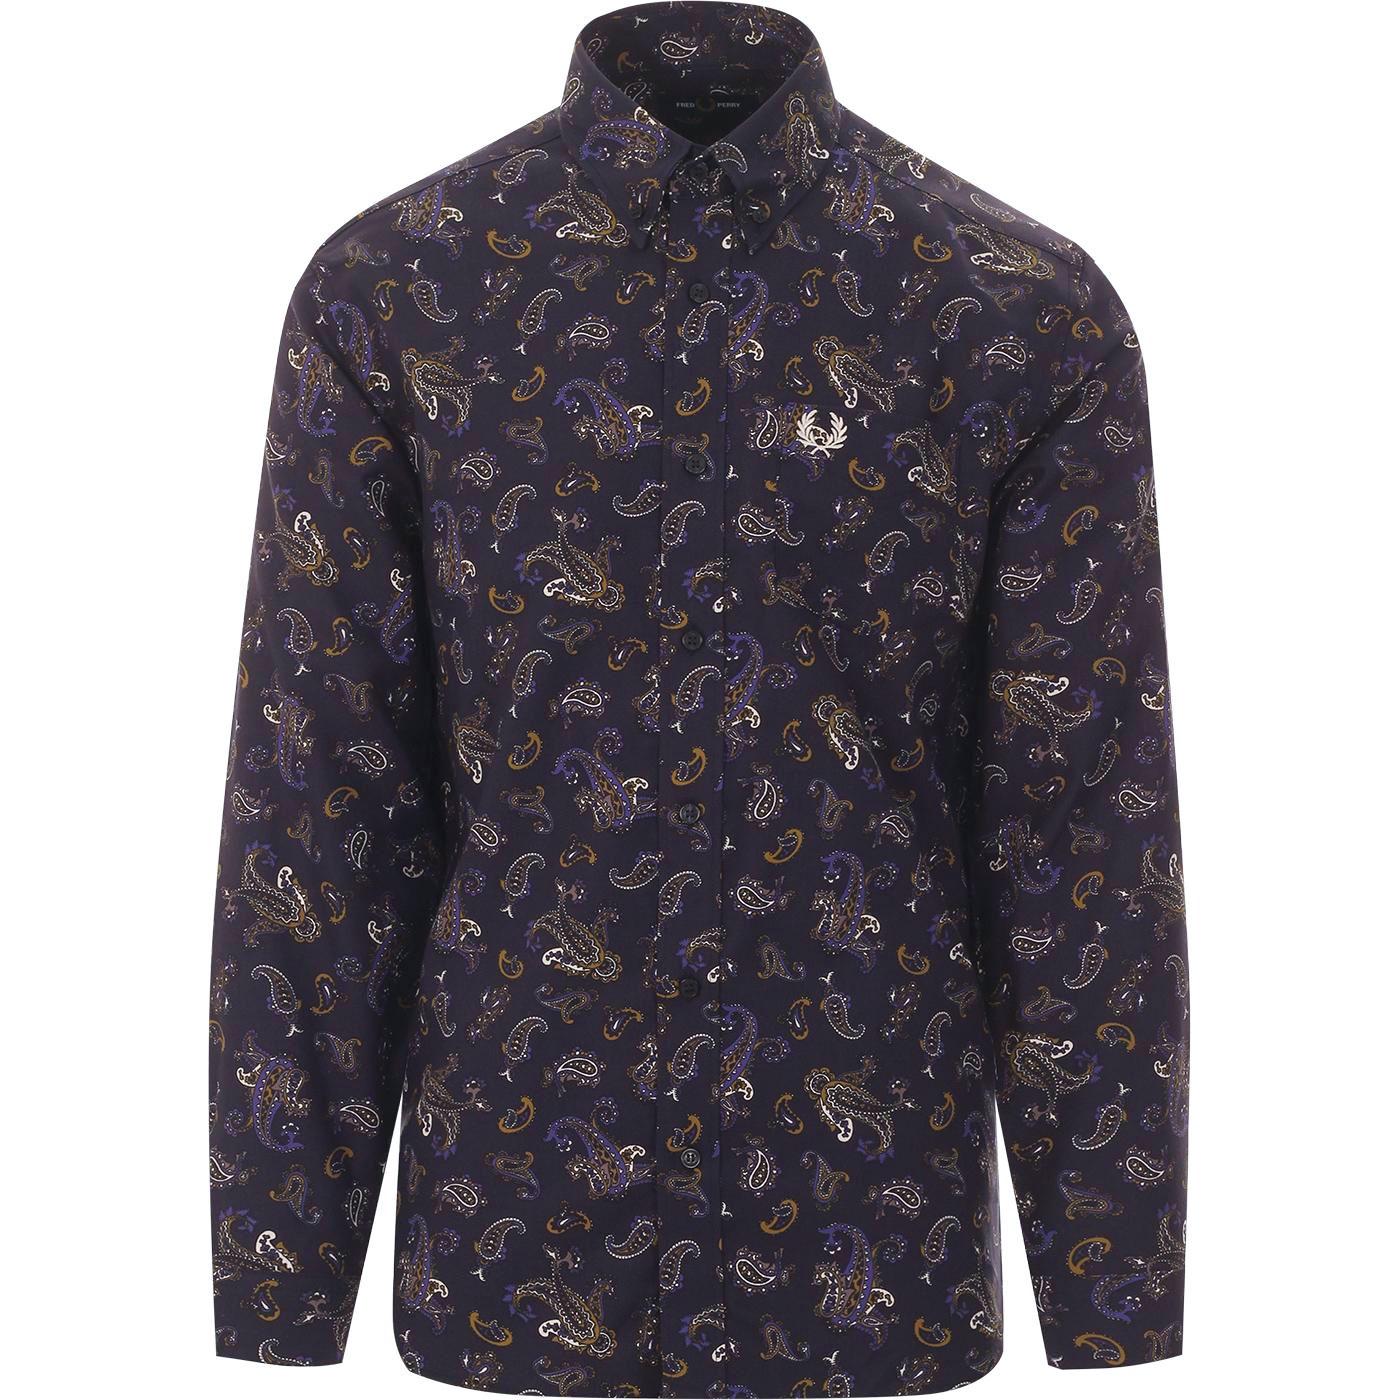 FRED PERRY 60s Mod Button Down Paisley Print Shirt